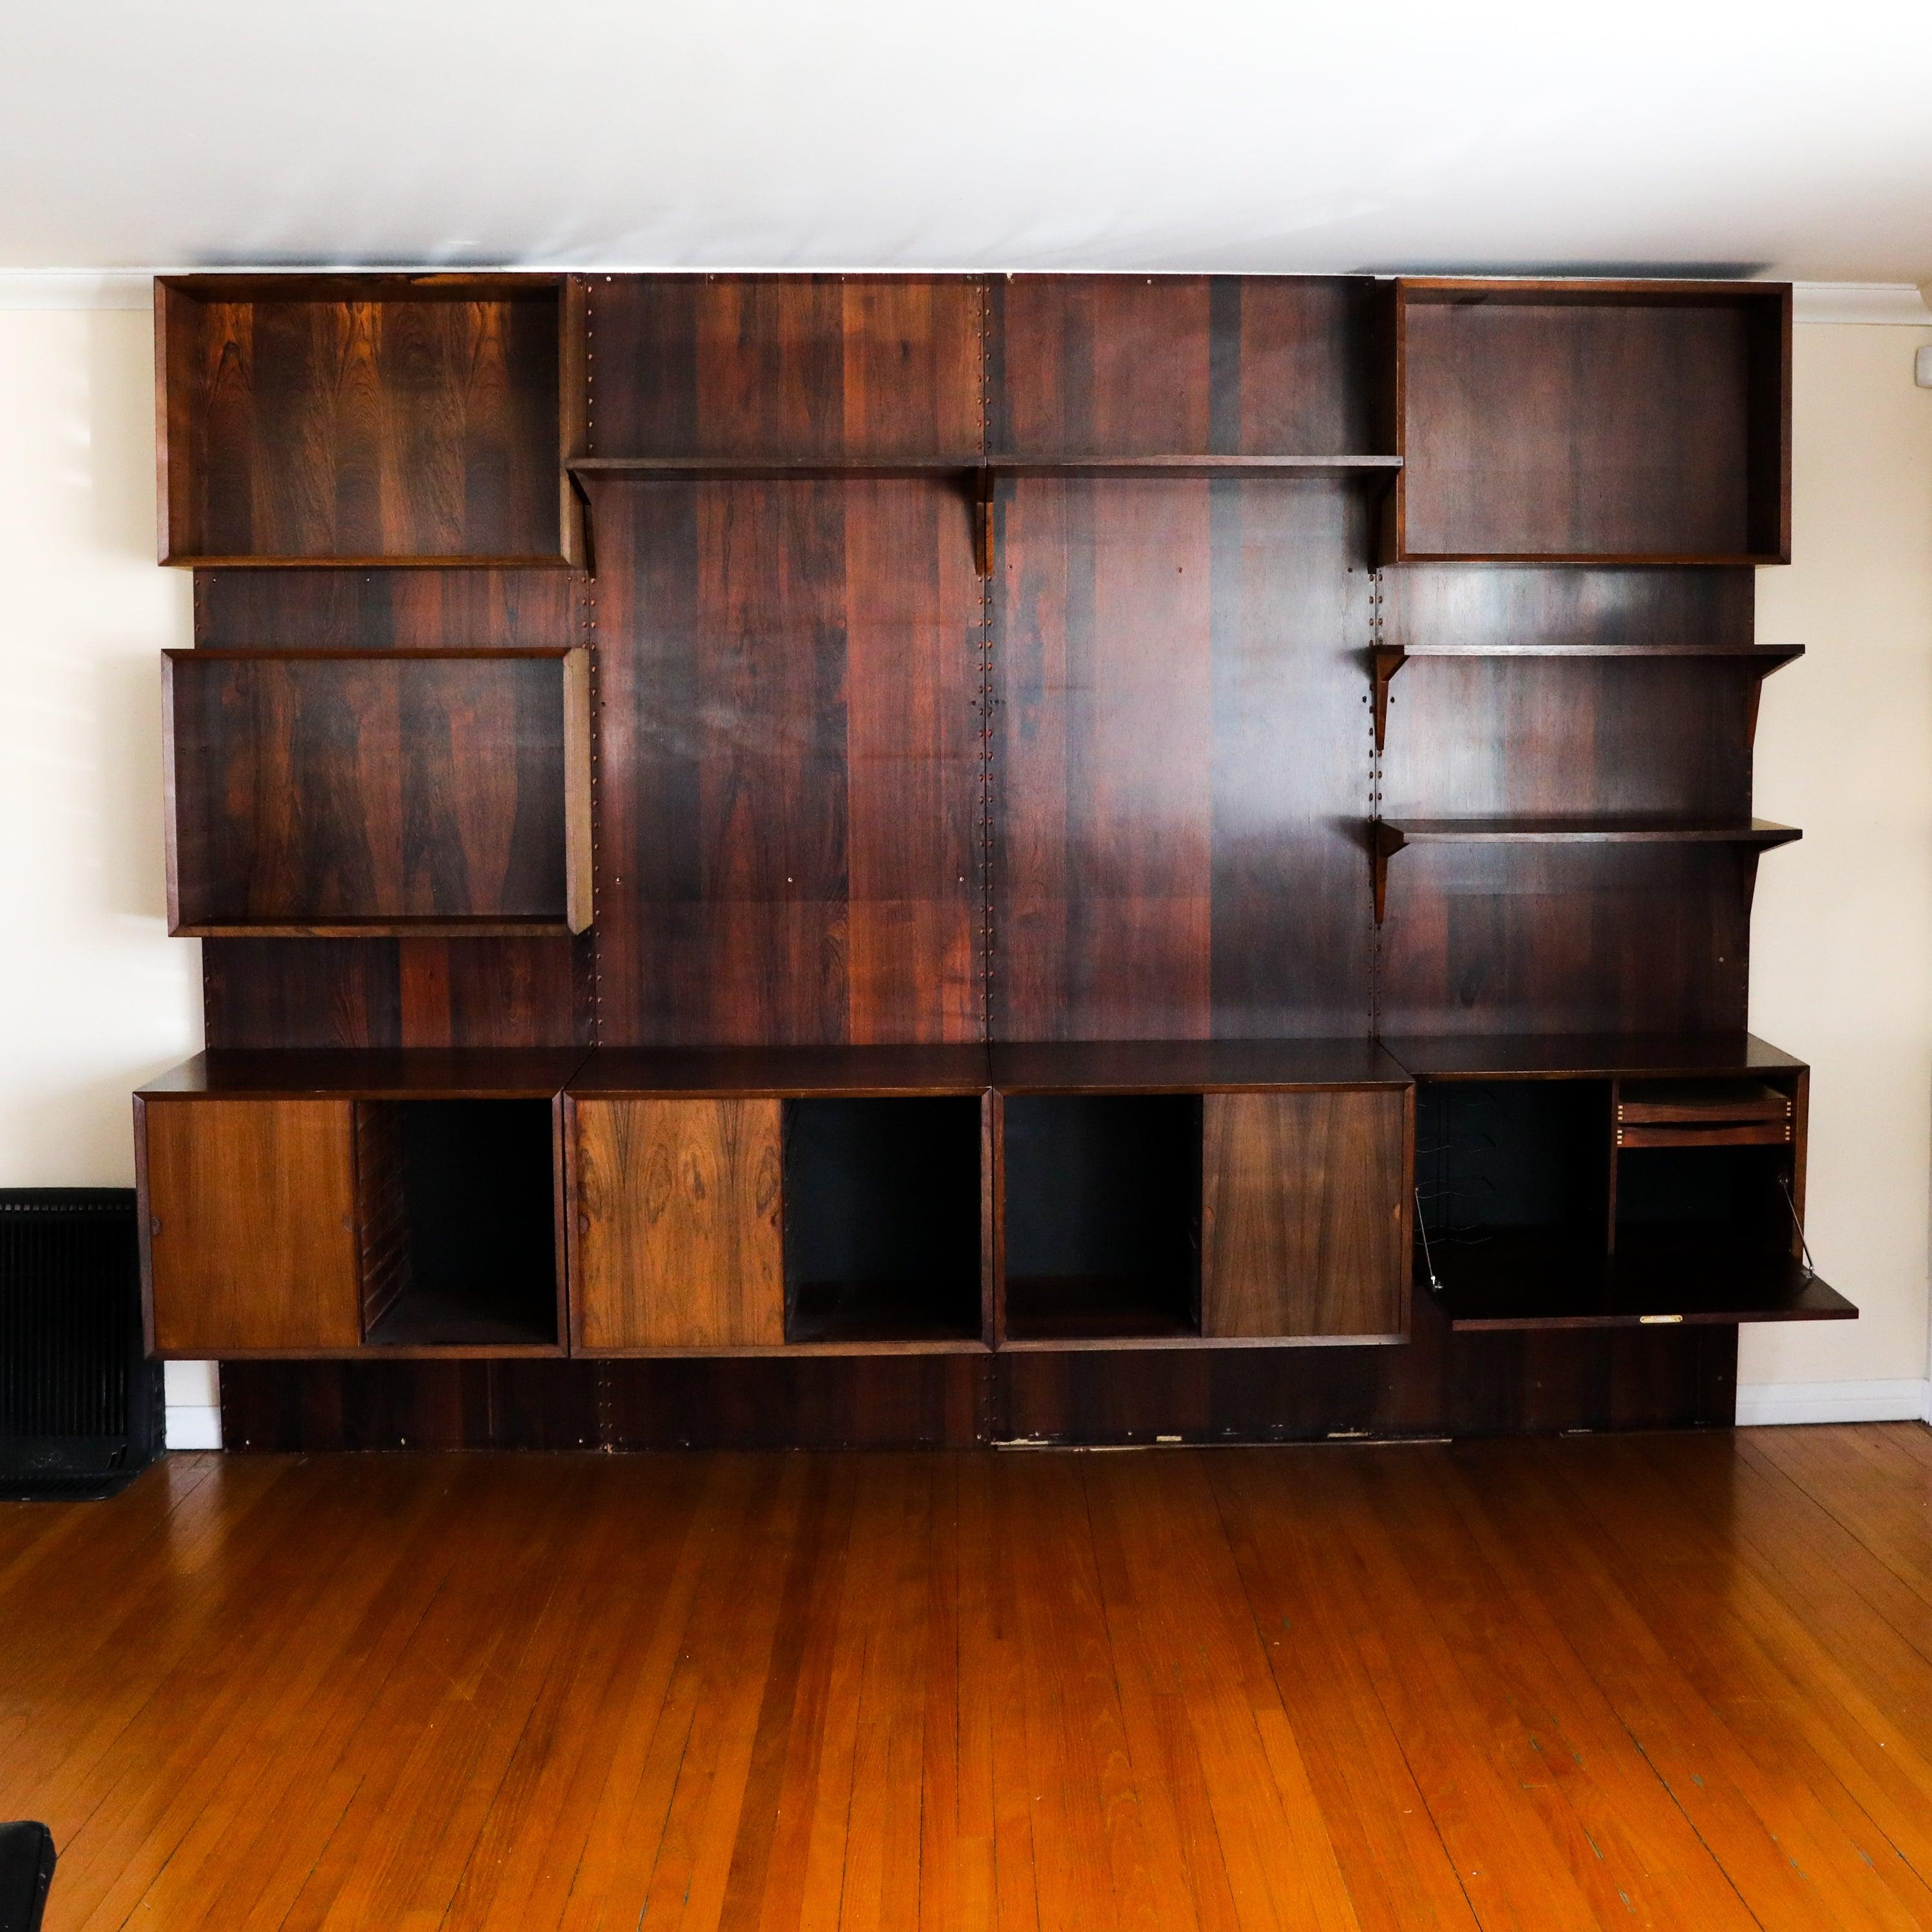 **Prices inclusive of restoration** Price does not include installation. 

Mid Century Modern Brazilian Rosewood Cado Wall Unit. This vintage unit is completely modular and in excellent shape for its age. It has endless possibilities as to where you